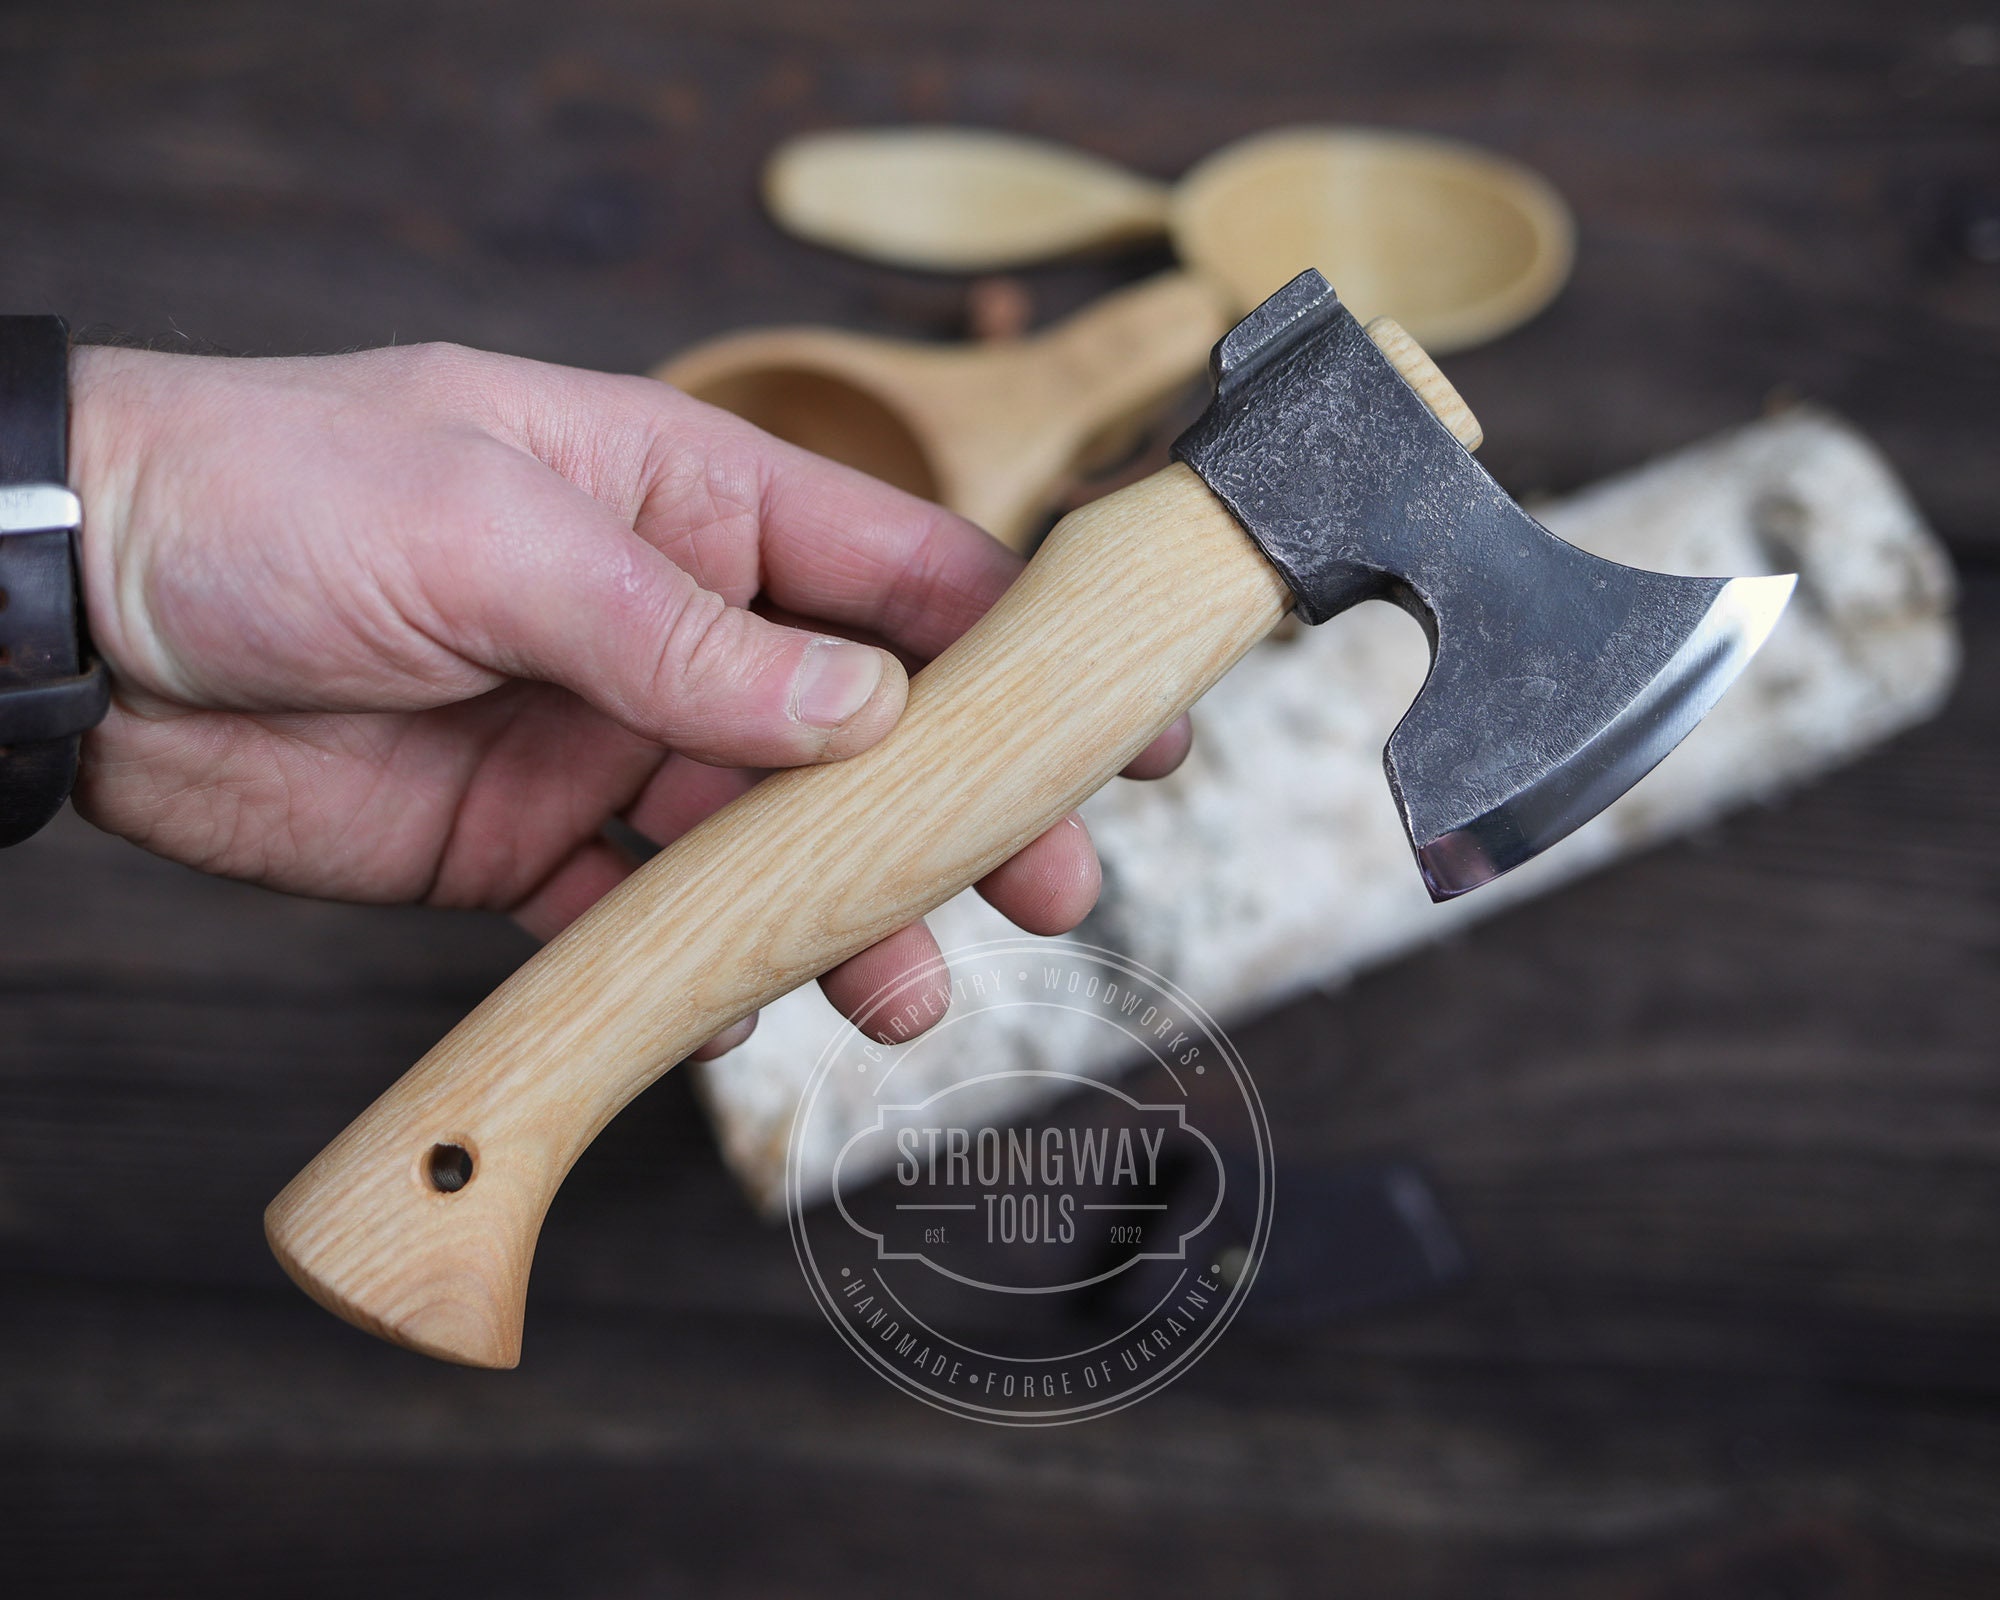 Micro Carving Axe, Wood Carving, Spoon Carving - The Spoon Crank